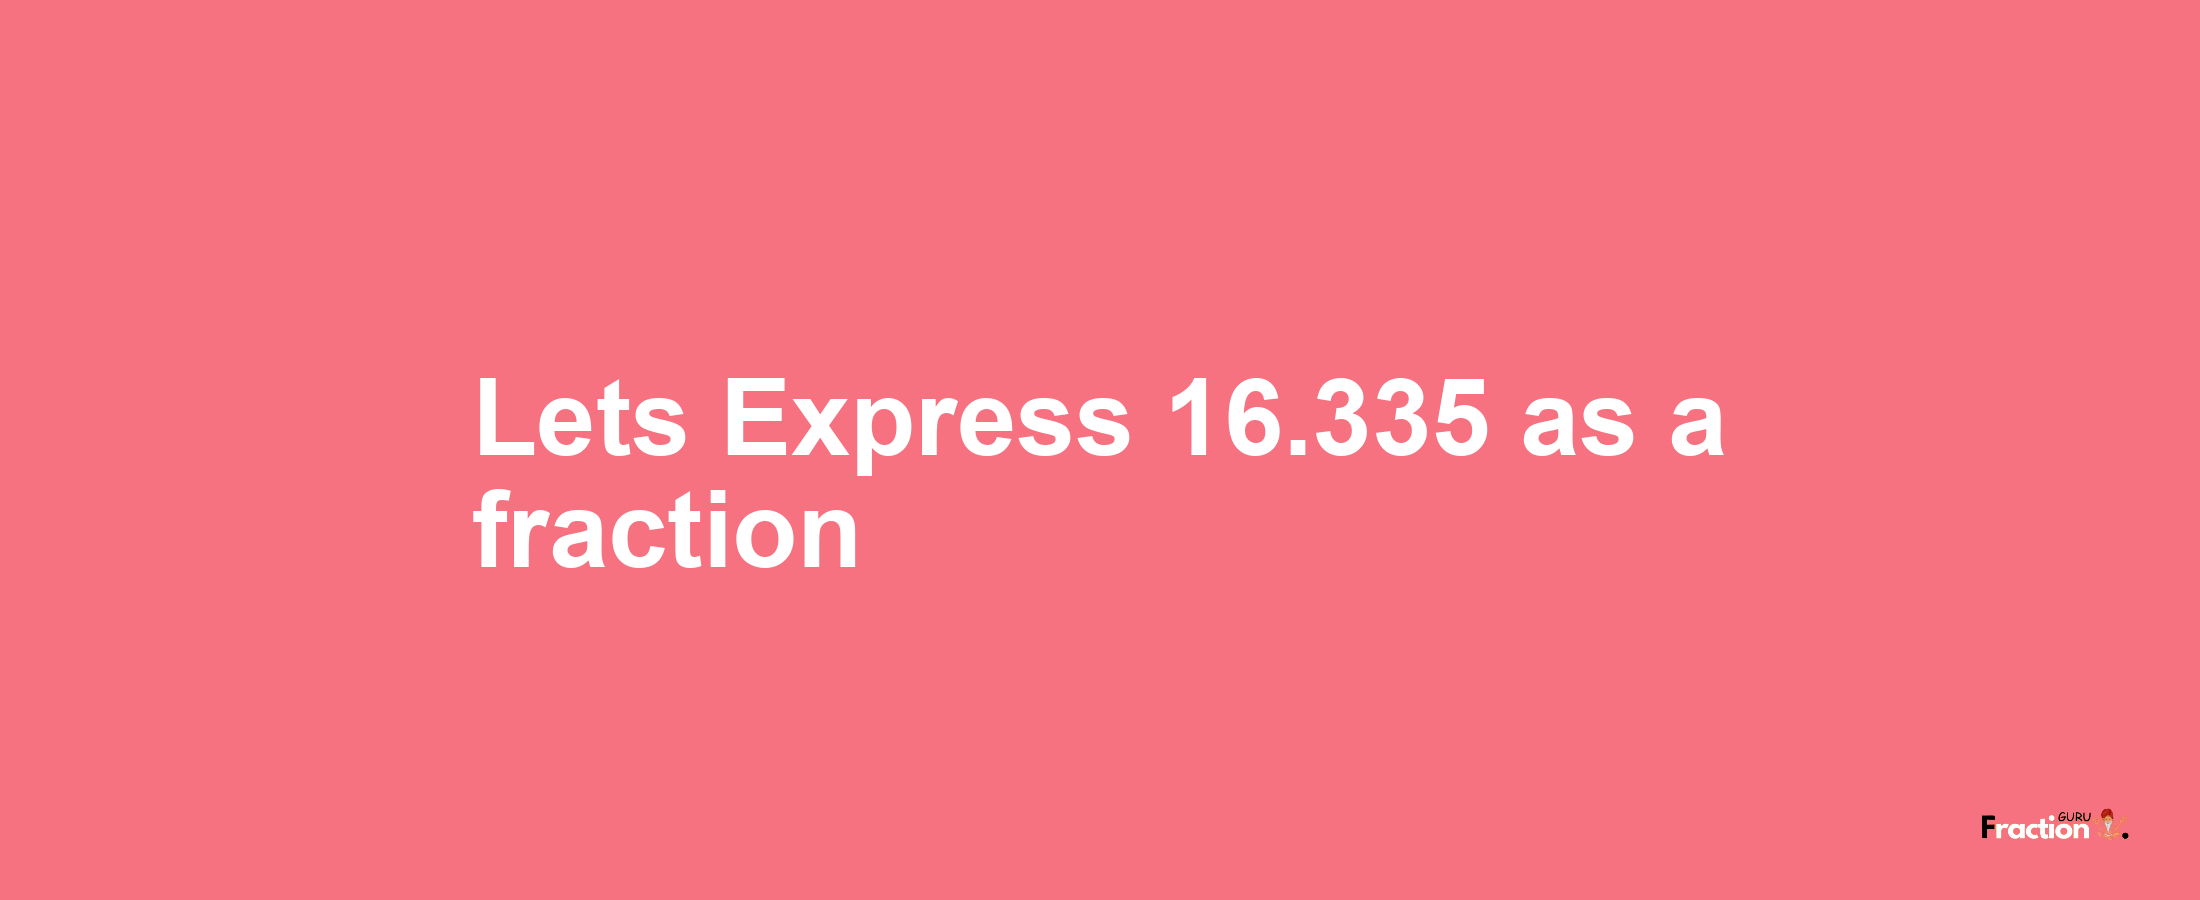 Lets Express 16.335 as afraction